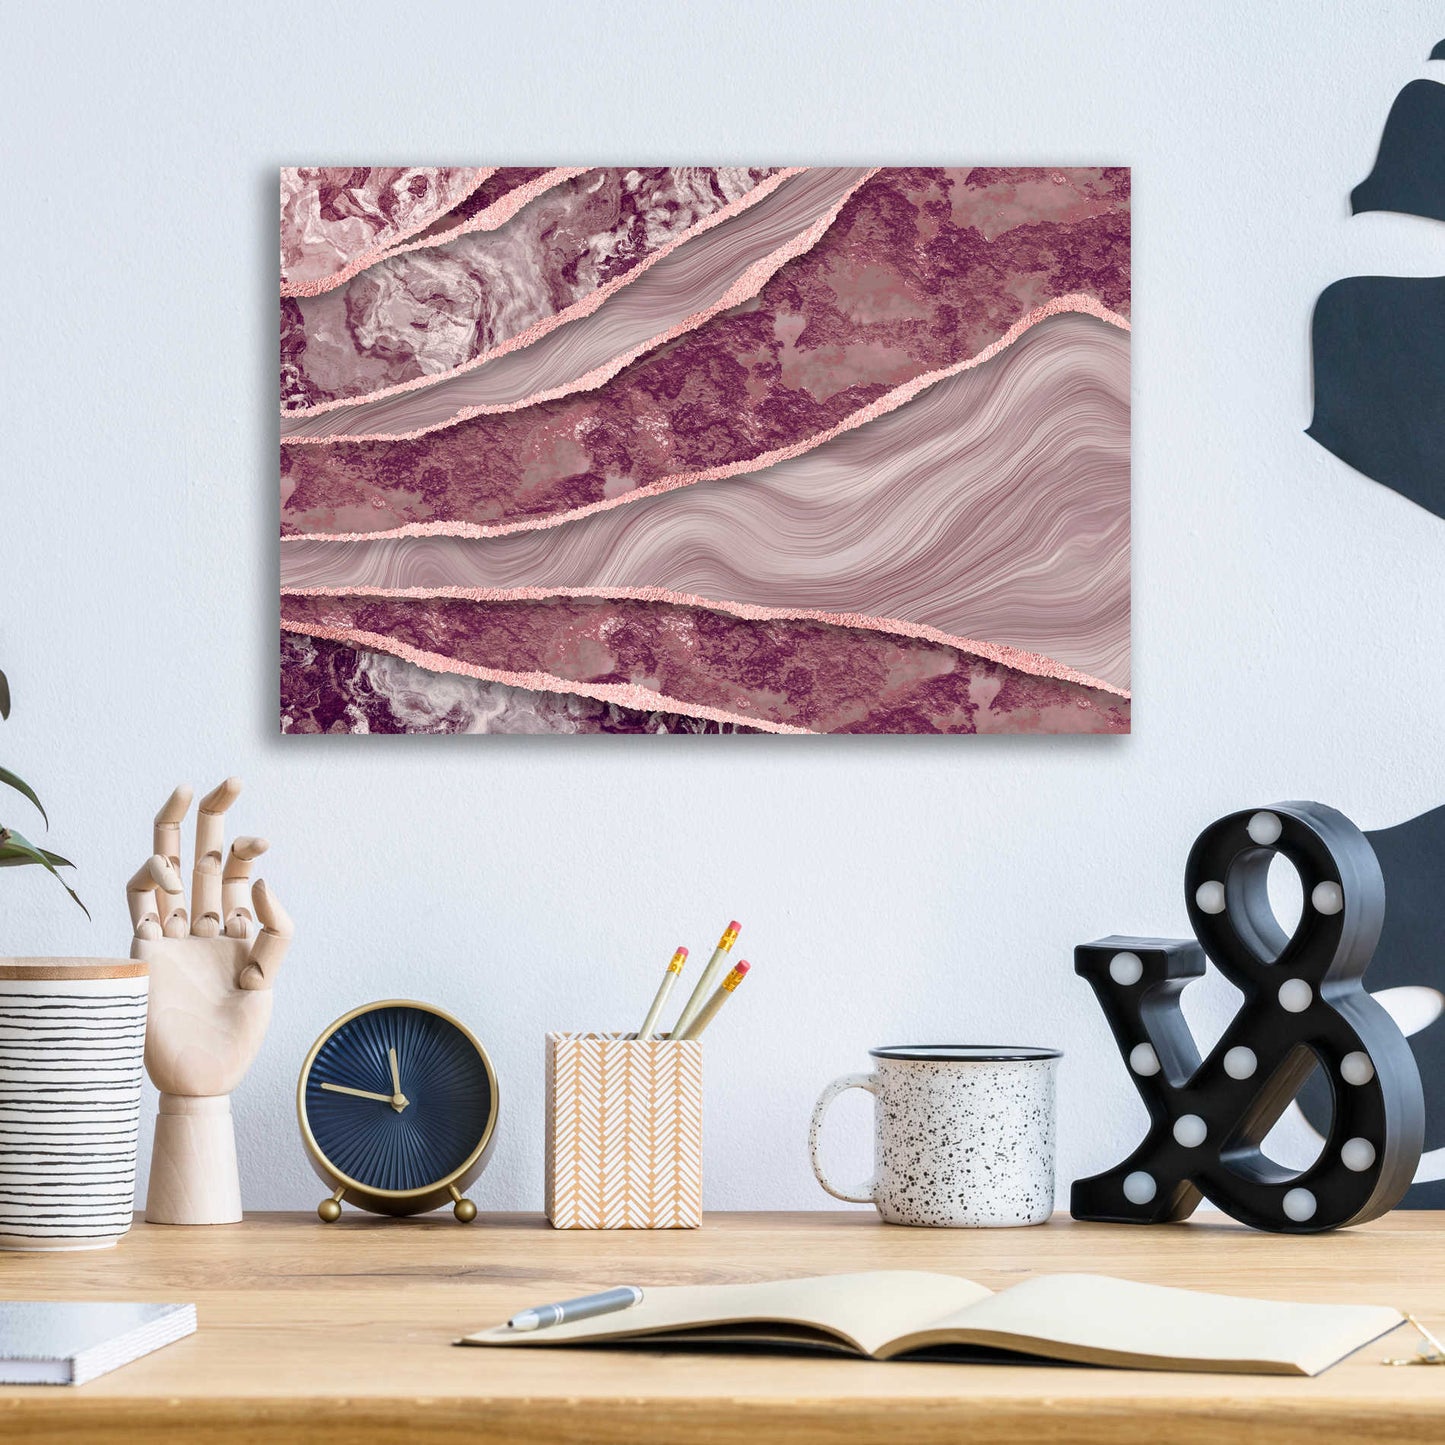 Epic Art 'Rose Quartz Marble And Stone' by Andrea Haase Acrylic Glass Wall Art,16x12